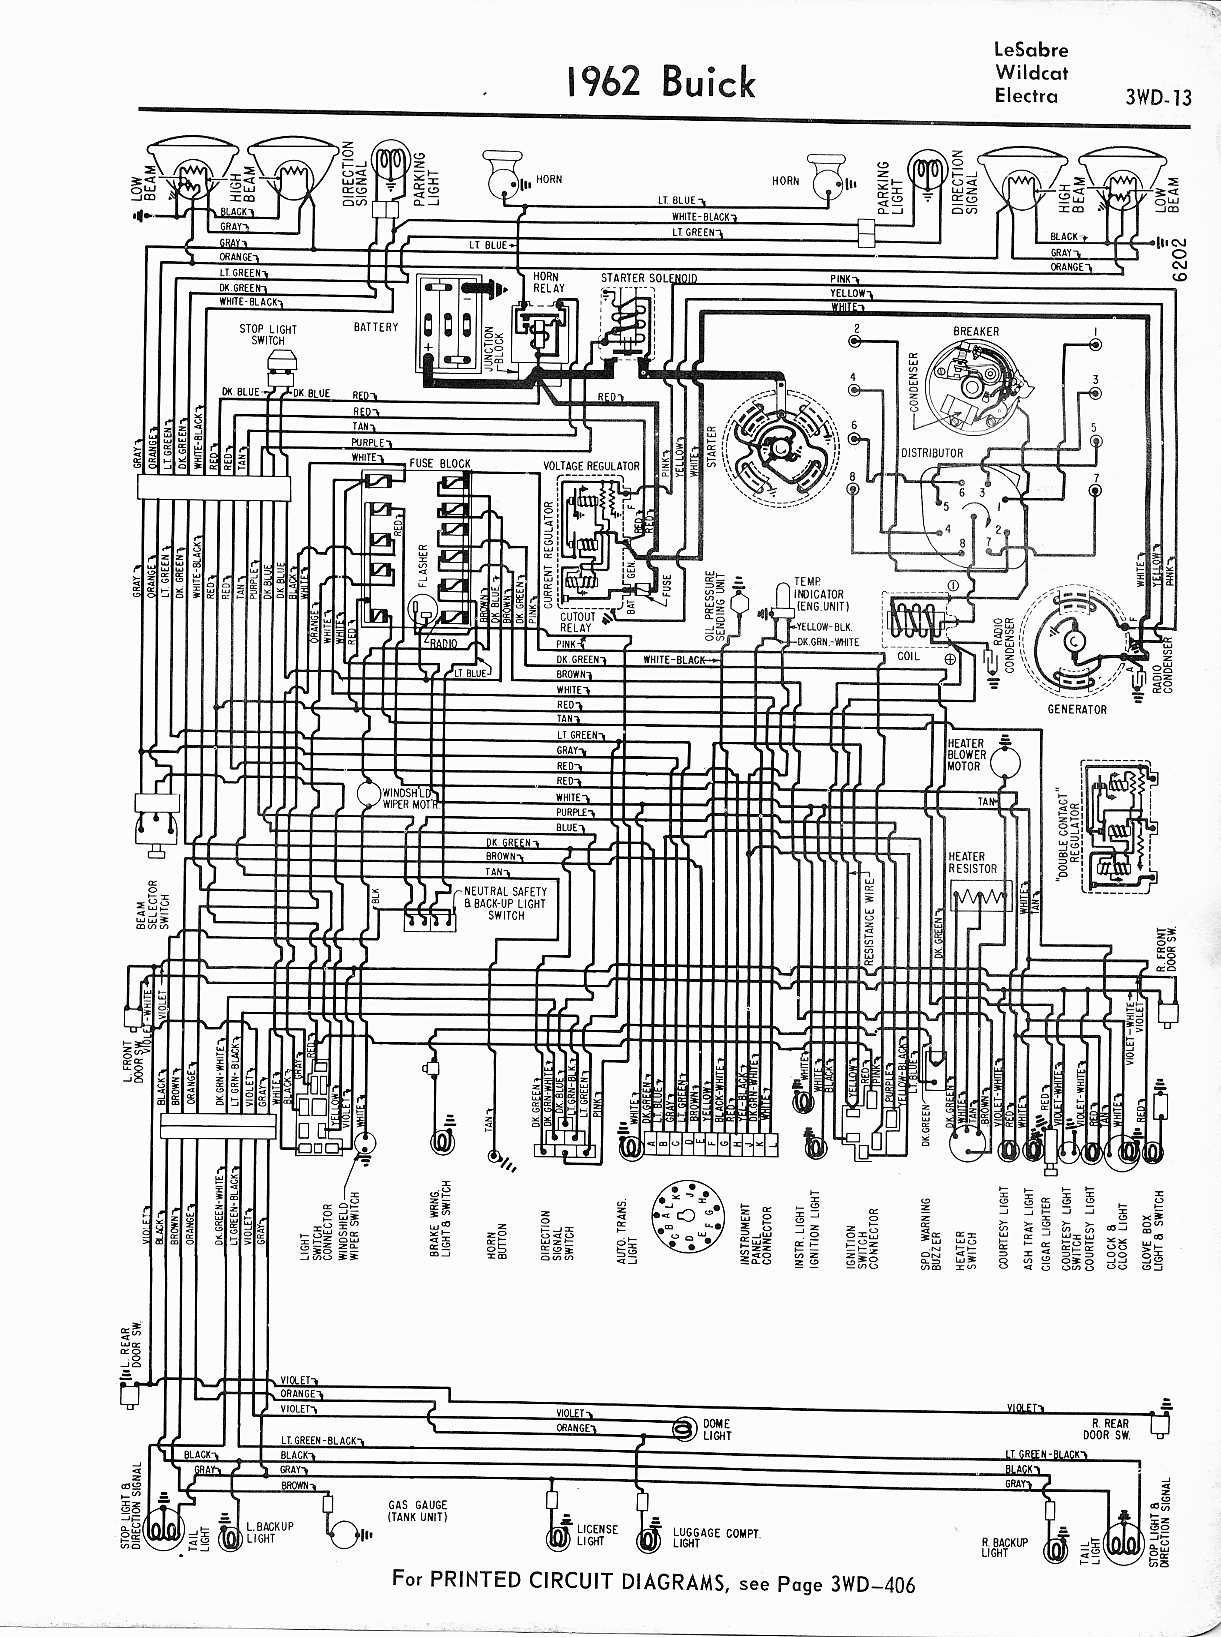 1996 Buick Regal Wiring Diagram from www.oldcarmanualproject.com